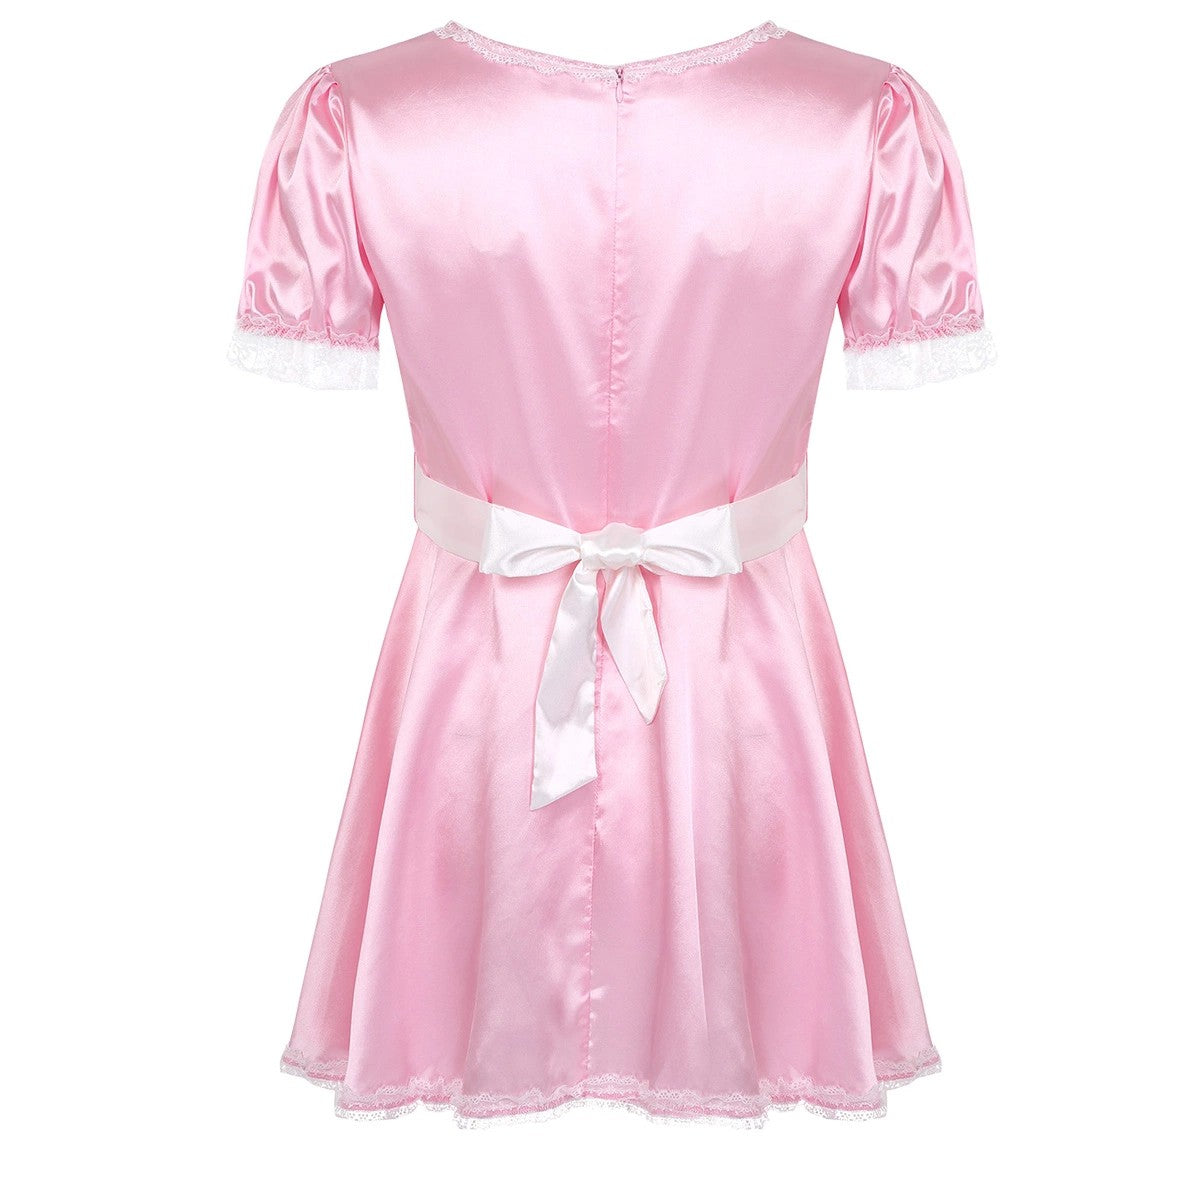 Sissy Maid Satin Dress with Apron - Sissy Lux